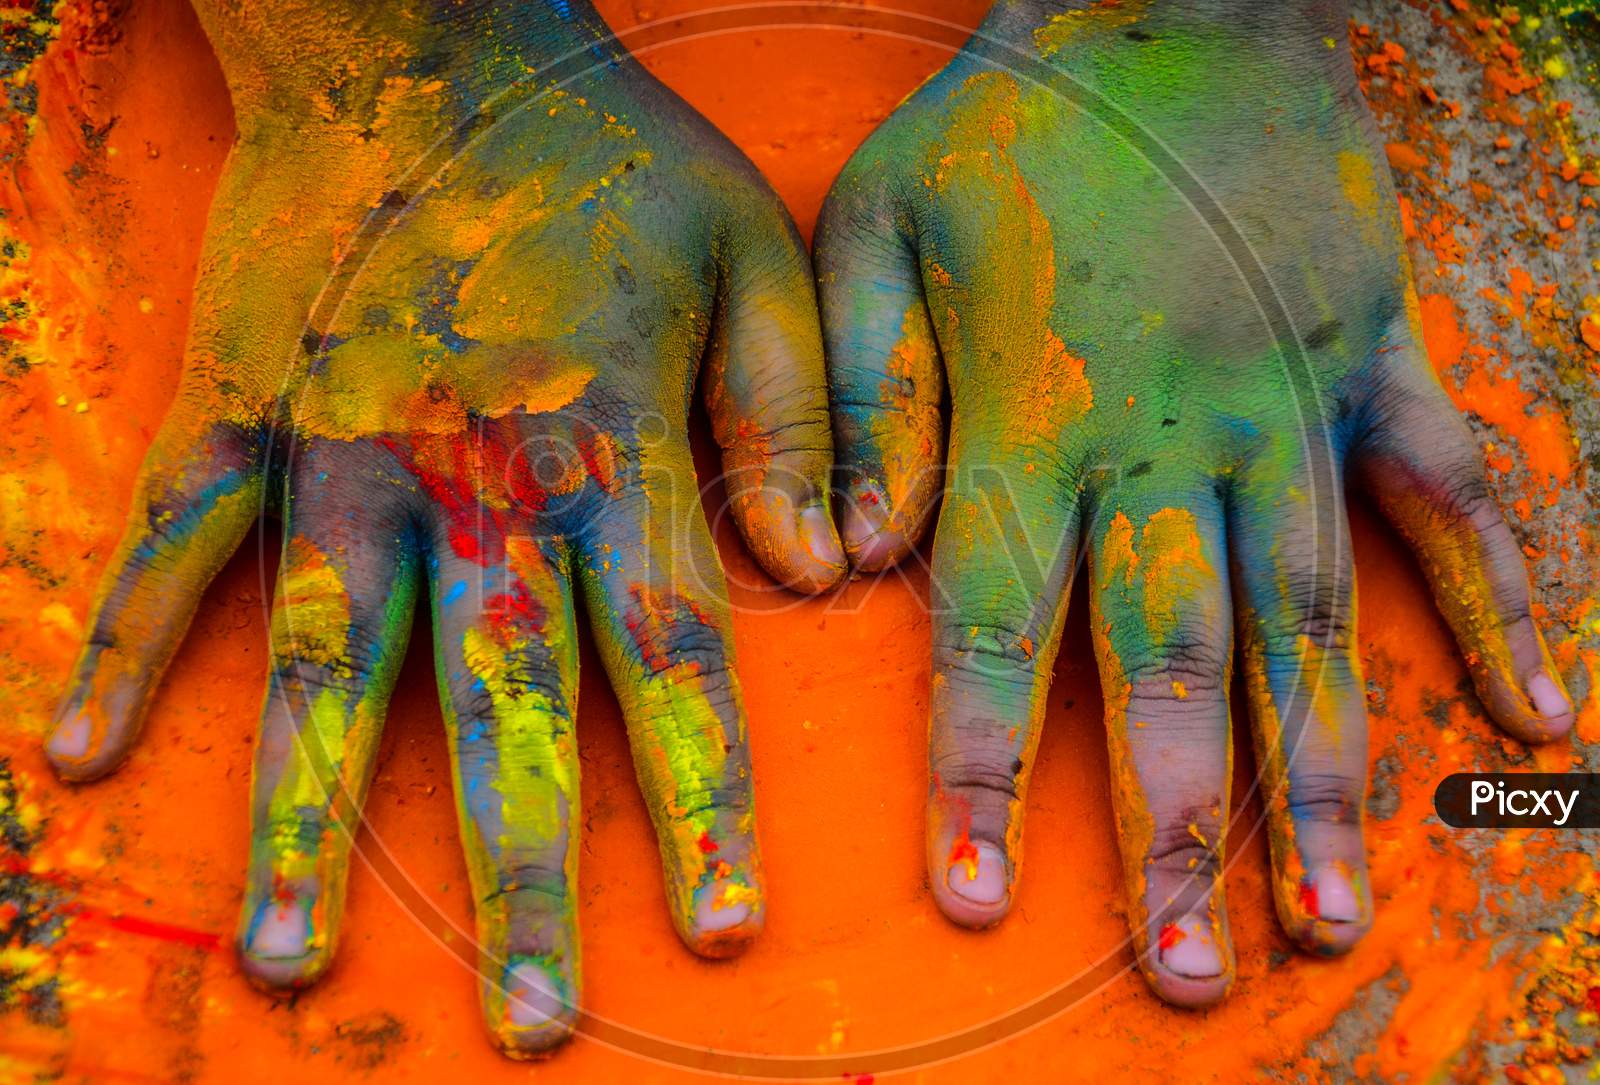 a pair of painted hands during Holi the festival of colours